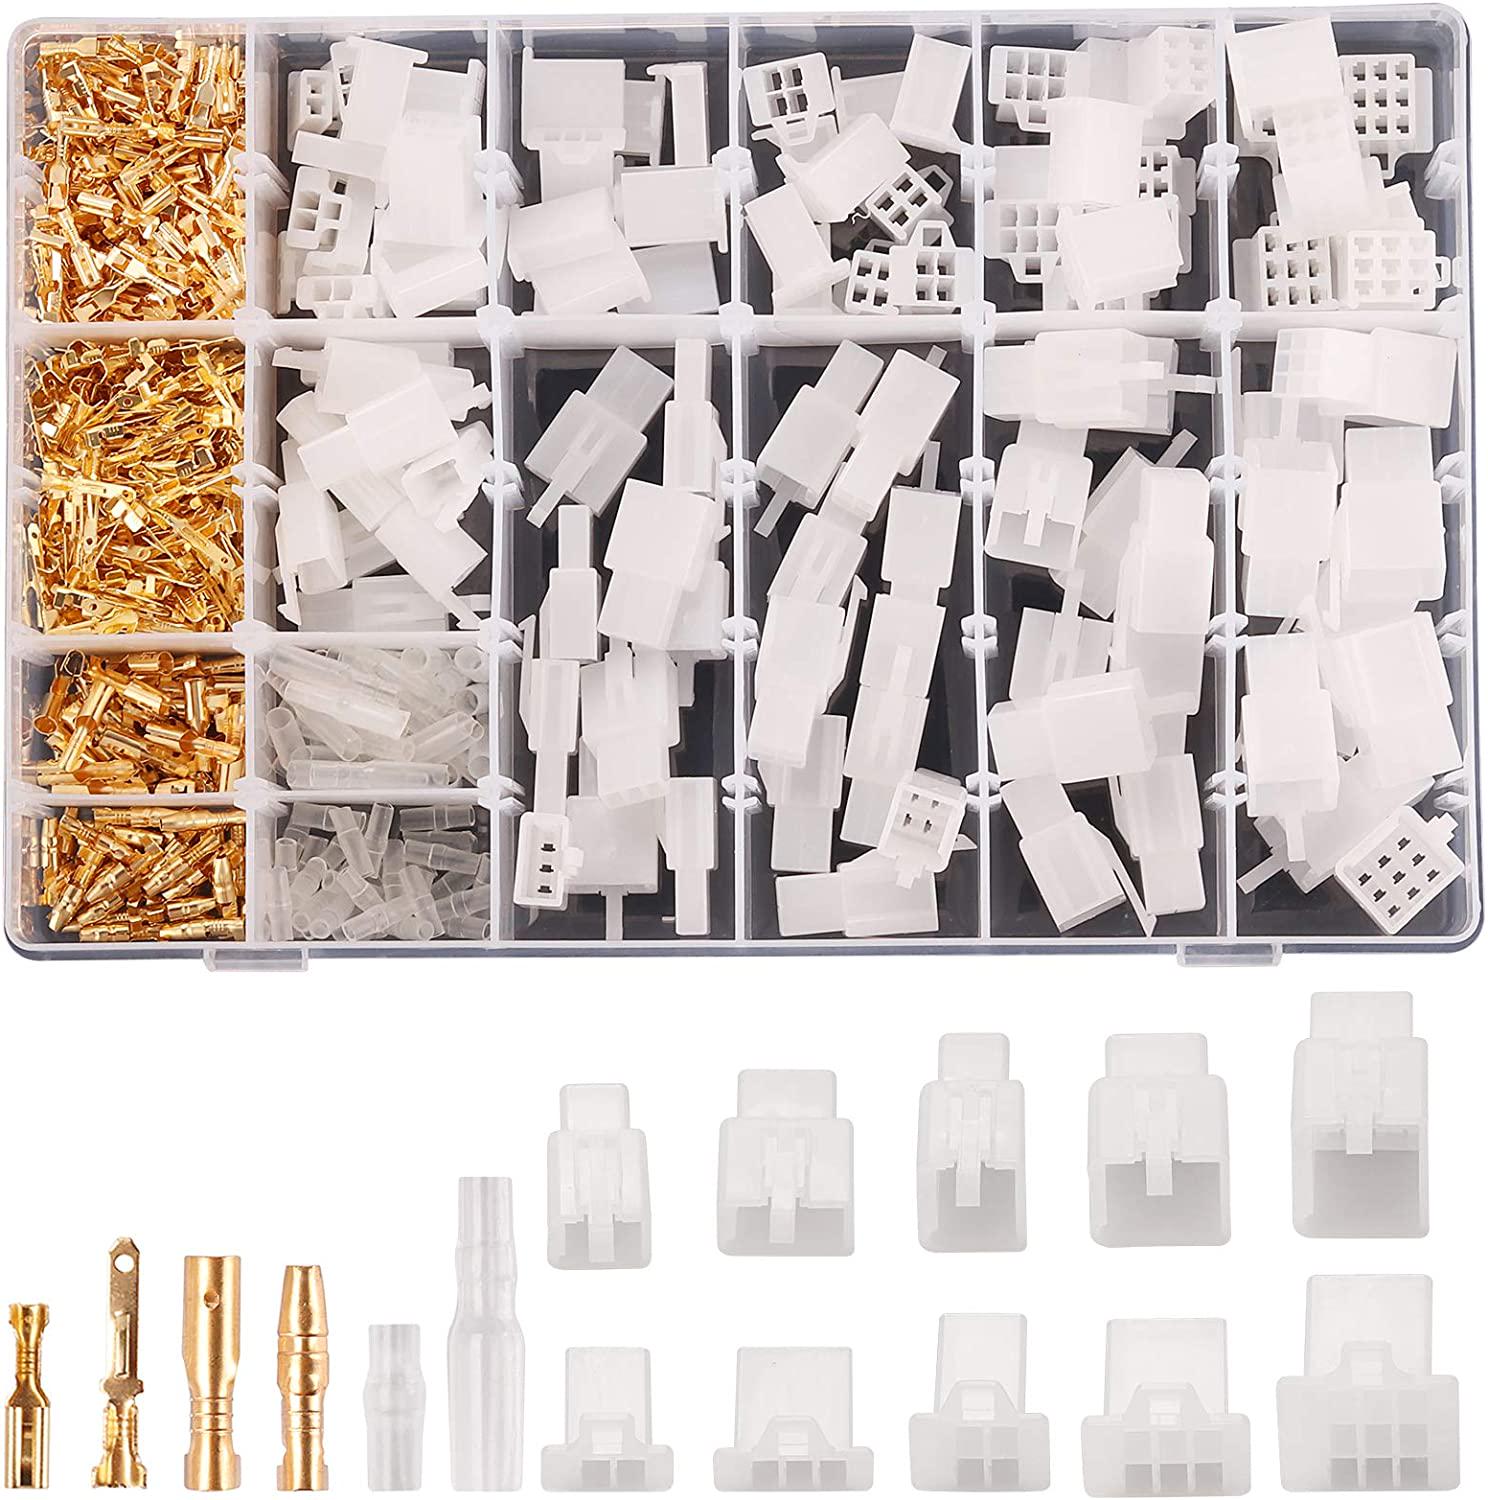 Kinstecks, Kinstecks 700PCS 2.8mm Automotive Connector Kit 2 3 4 6 9 Pin Automotive Electrical Wire Connectors Kit with 30 Sets 3.9mm Bullet Terminal Connector for Motorcycle Motorbike Car Truck Boats Electric